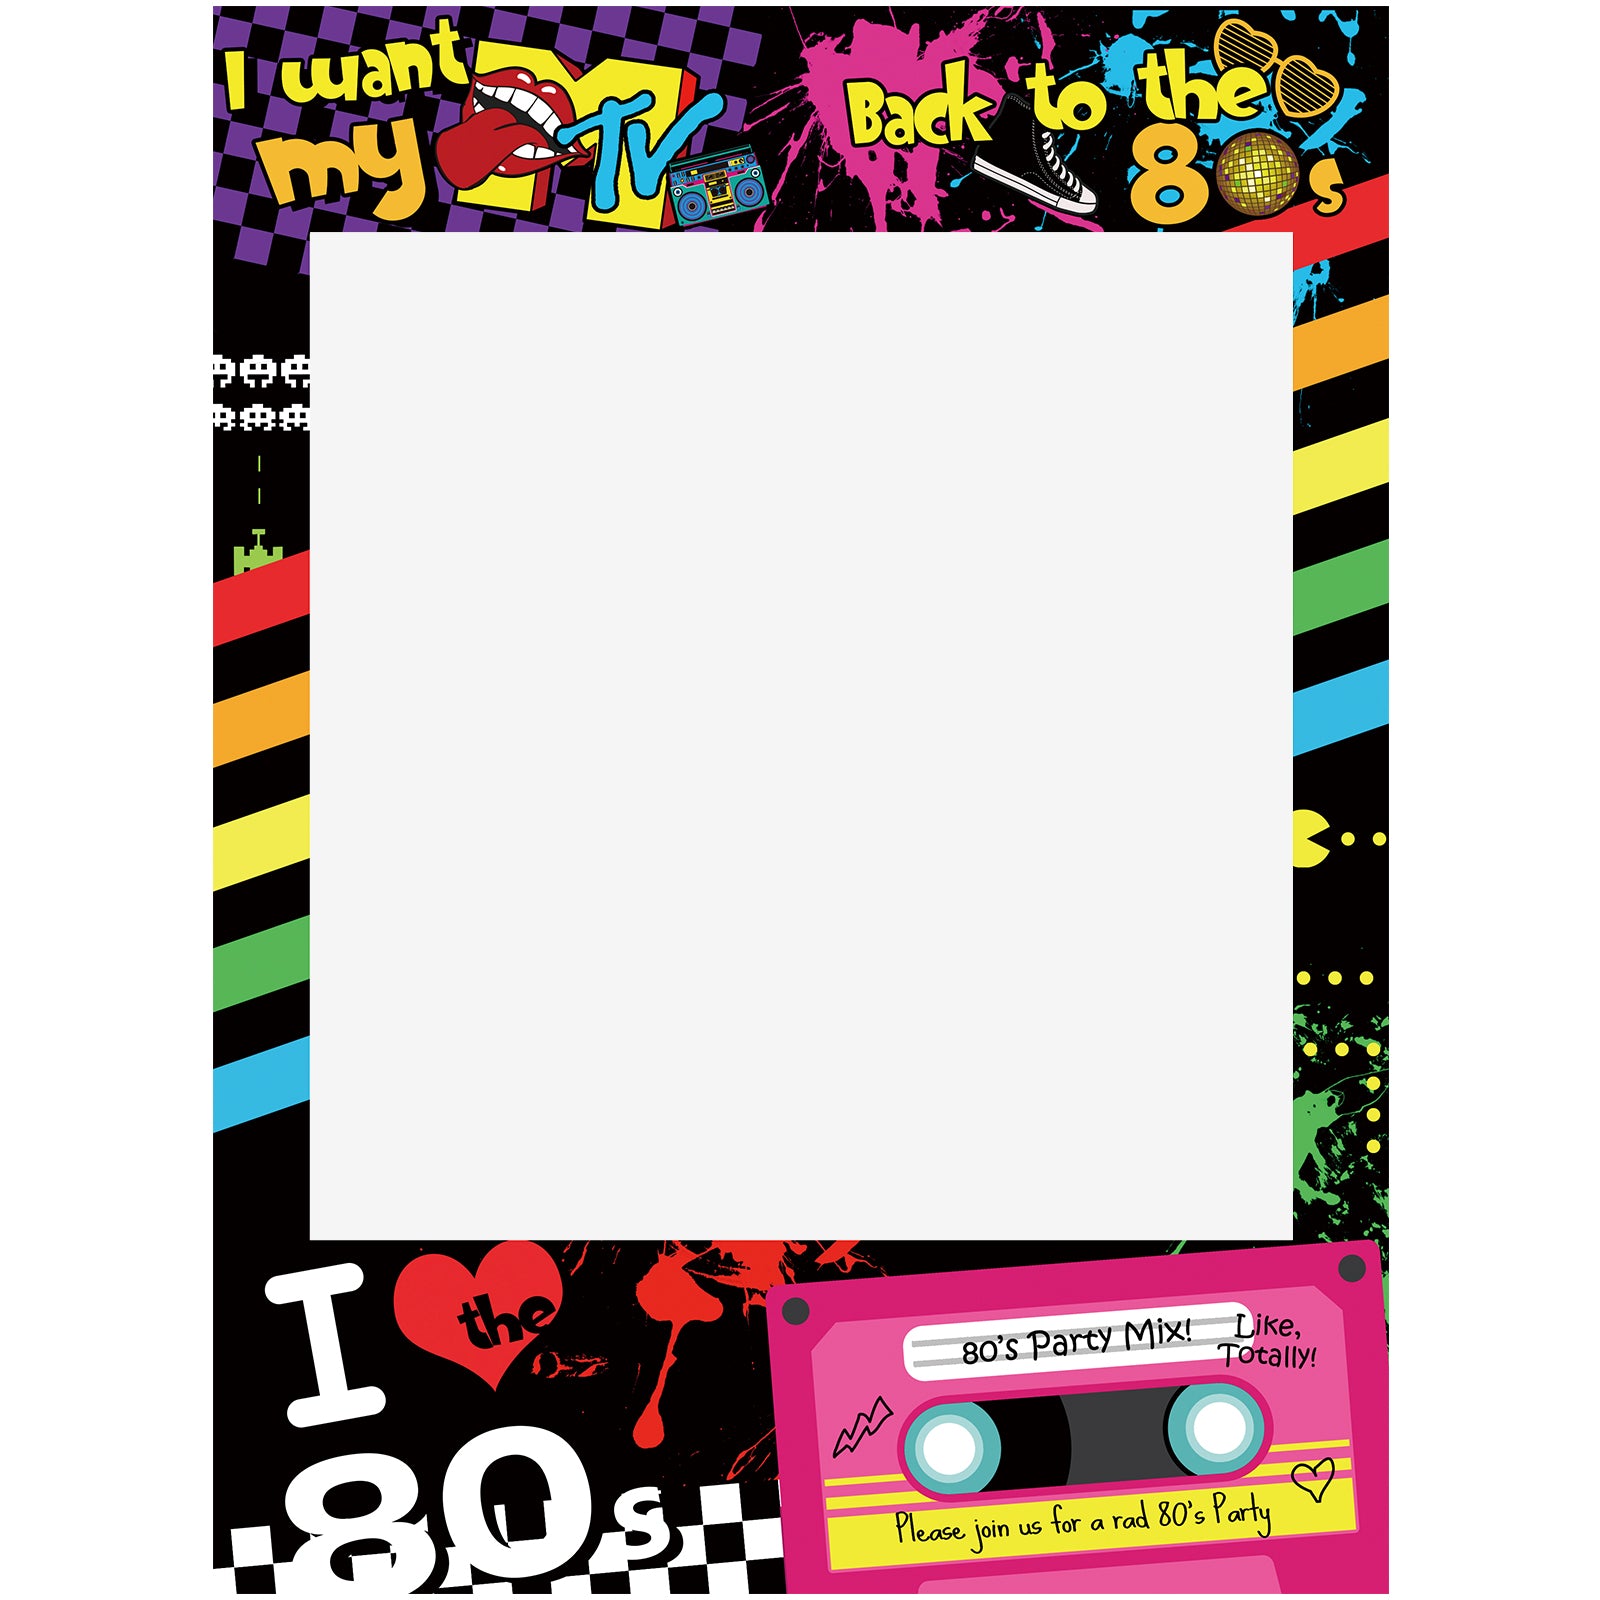 I love 80s Photo Booth Frame Photobooth Props Not Pre-cut for Easy Mounting by Self 23x17inch